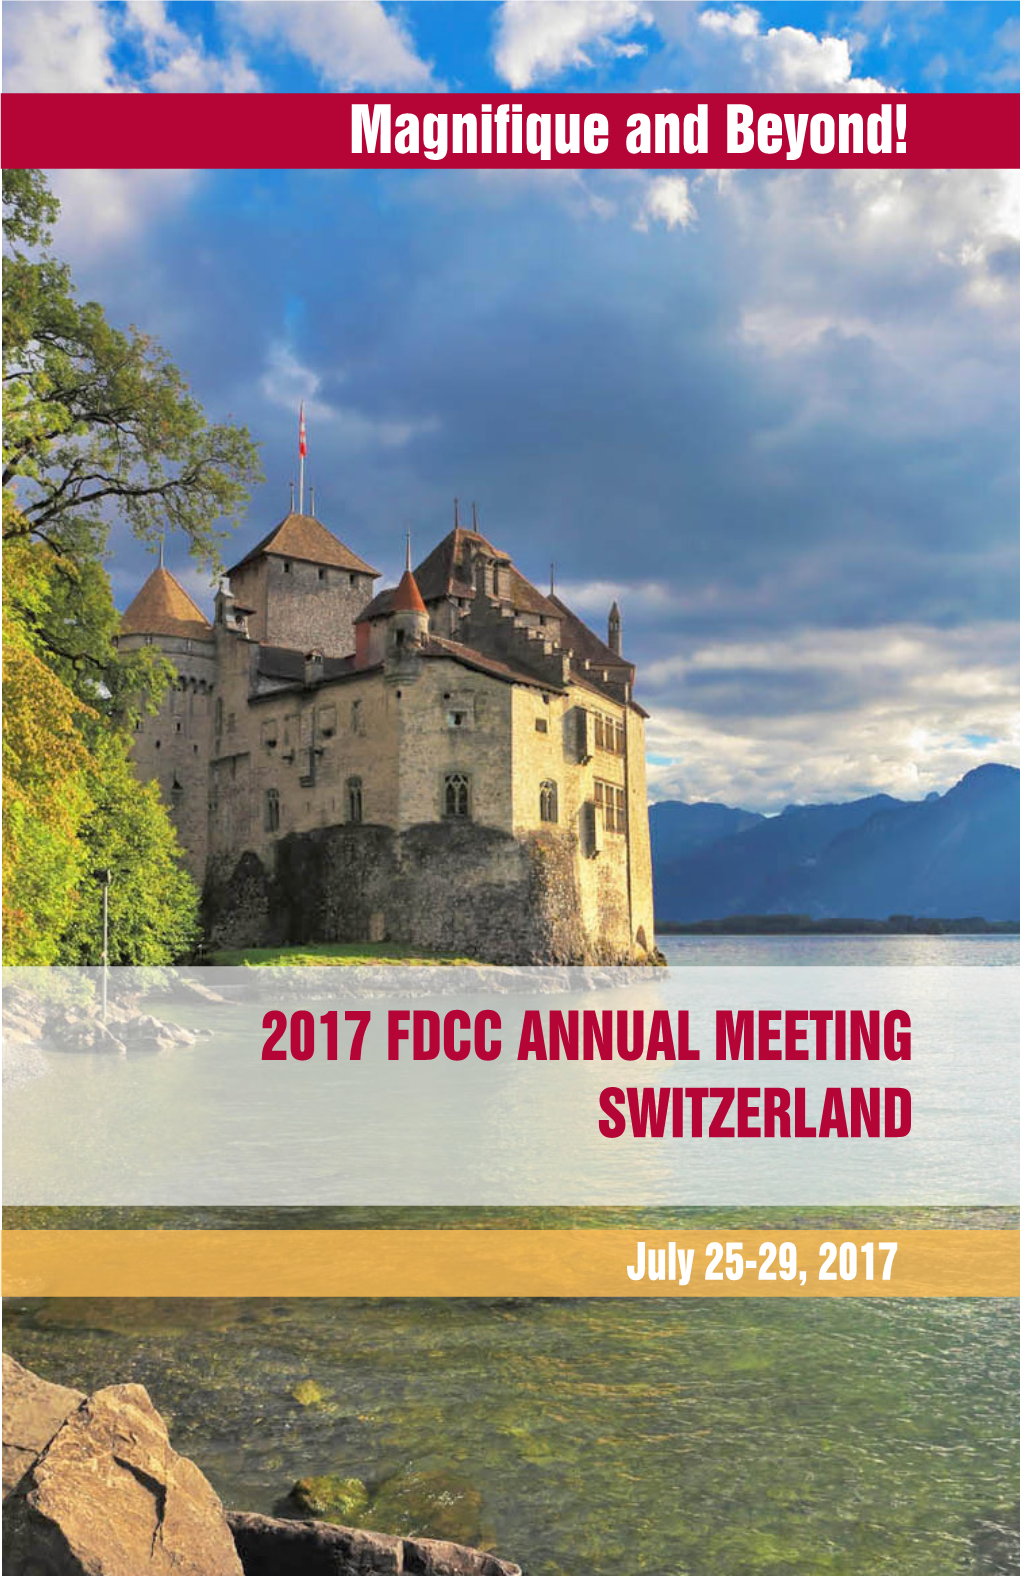 2017 Fdcc Annual Meeting Switzerland